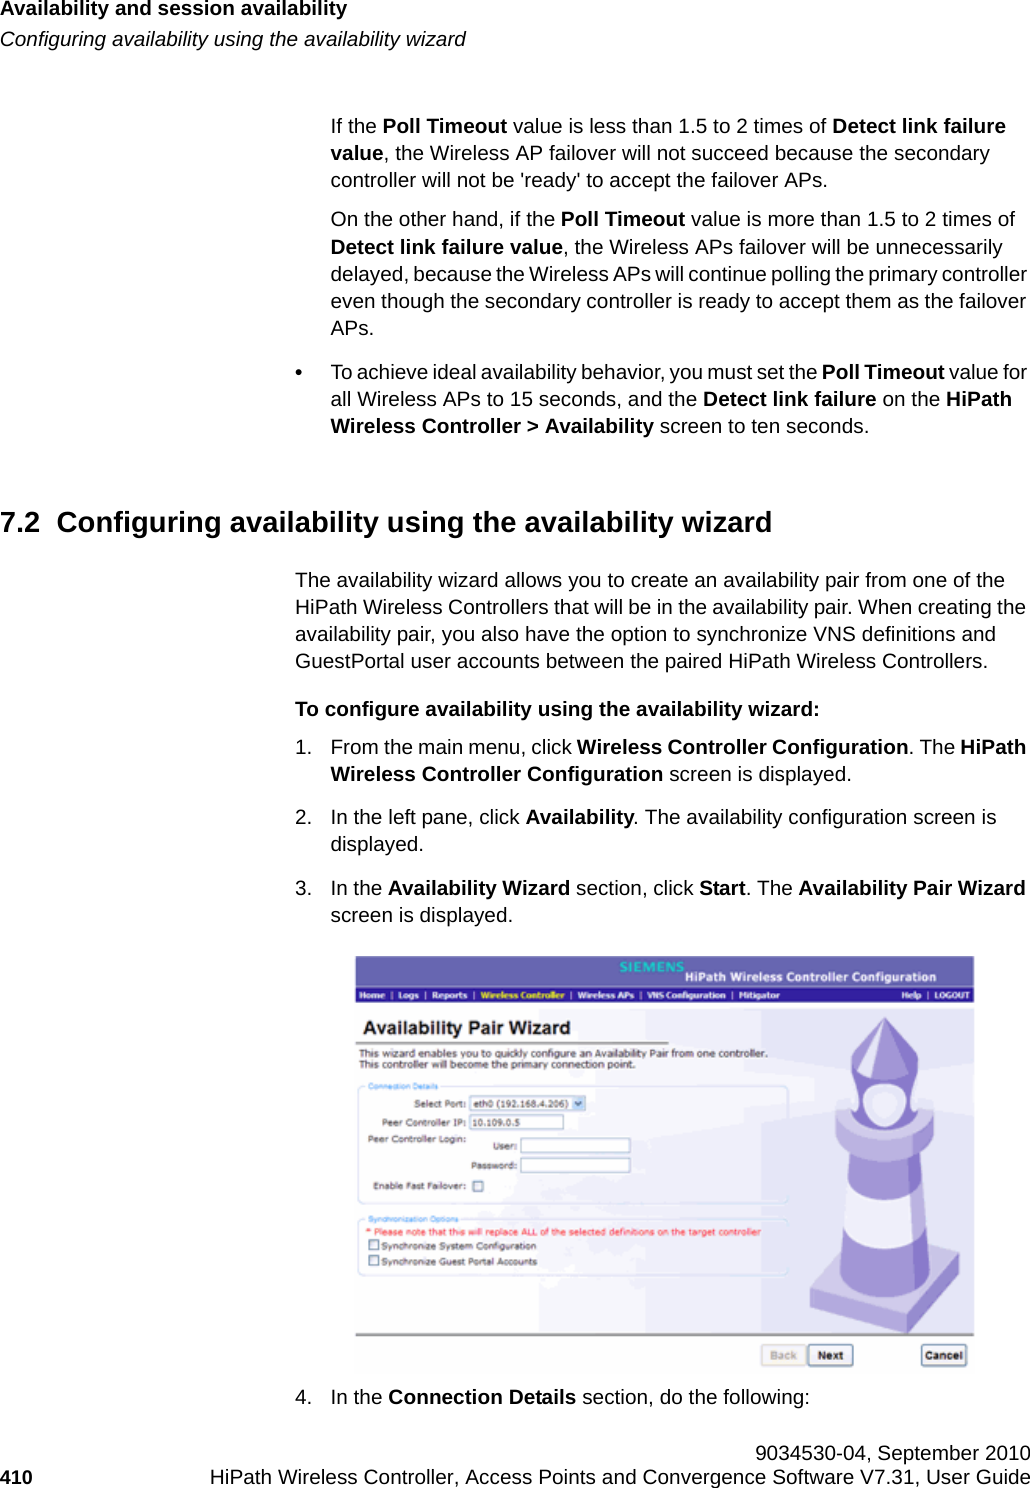 Availability and session availabilityhwc_fastfailover.fmConfiguring availability using the availability wizard 9034530-04, September 2010410 HiPath Wireless Controller, Access Points and Convergence Software V7.31, User Guide        If the Poll Timeout value is less than 1.5 to 2 times of Detect link failure value, the Wireless AP failover will not succeed because the secondary controller will not be &apos;ready&apos; to accept the failover APs. On the other hand, if the Poll Timeout value is more than 1.5 to 2 times of Detect link failure value, the Wireless APs failover will be unnecessarily delayed, because the Wireless APs will continue polling the primary controller even though the secondary controller is ready to accept them as the failover APs.•To achieve ideal availability behavior, you must set the Poll Timeout value for all Wireless APs to 15 seconds, and the Detect link failure on the HiPath Wireless Controller &gt; Availability screen to ten seconds.7.2  Configuring availability using the availability wizardThe availability wizard allows you to create an availability pair from one of the HiPath Wireless Controllers that will be in the availability pair. When creating the availability pair, you also have the option to synchronize VNS definitions and GuestPortal user accounts between the paired HiPath Wireless Controllers.To configure availability using the availability wizard:1. From the main menu, click Wireless Controller Configuration. The HiPath Wireless Controller Configuration screen is displayed.2. In the left pane, click Availability. The availability configuration screen is displayed.3. In the Availability Wizard section, click Start. The Availability Pair Wizard screen is displayed.4. In the Connection Details section, do the following: